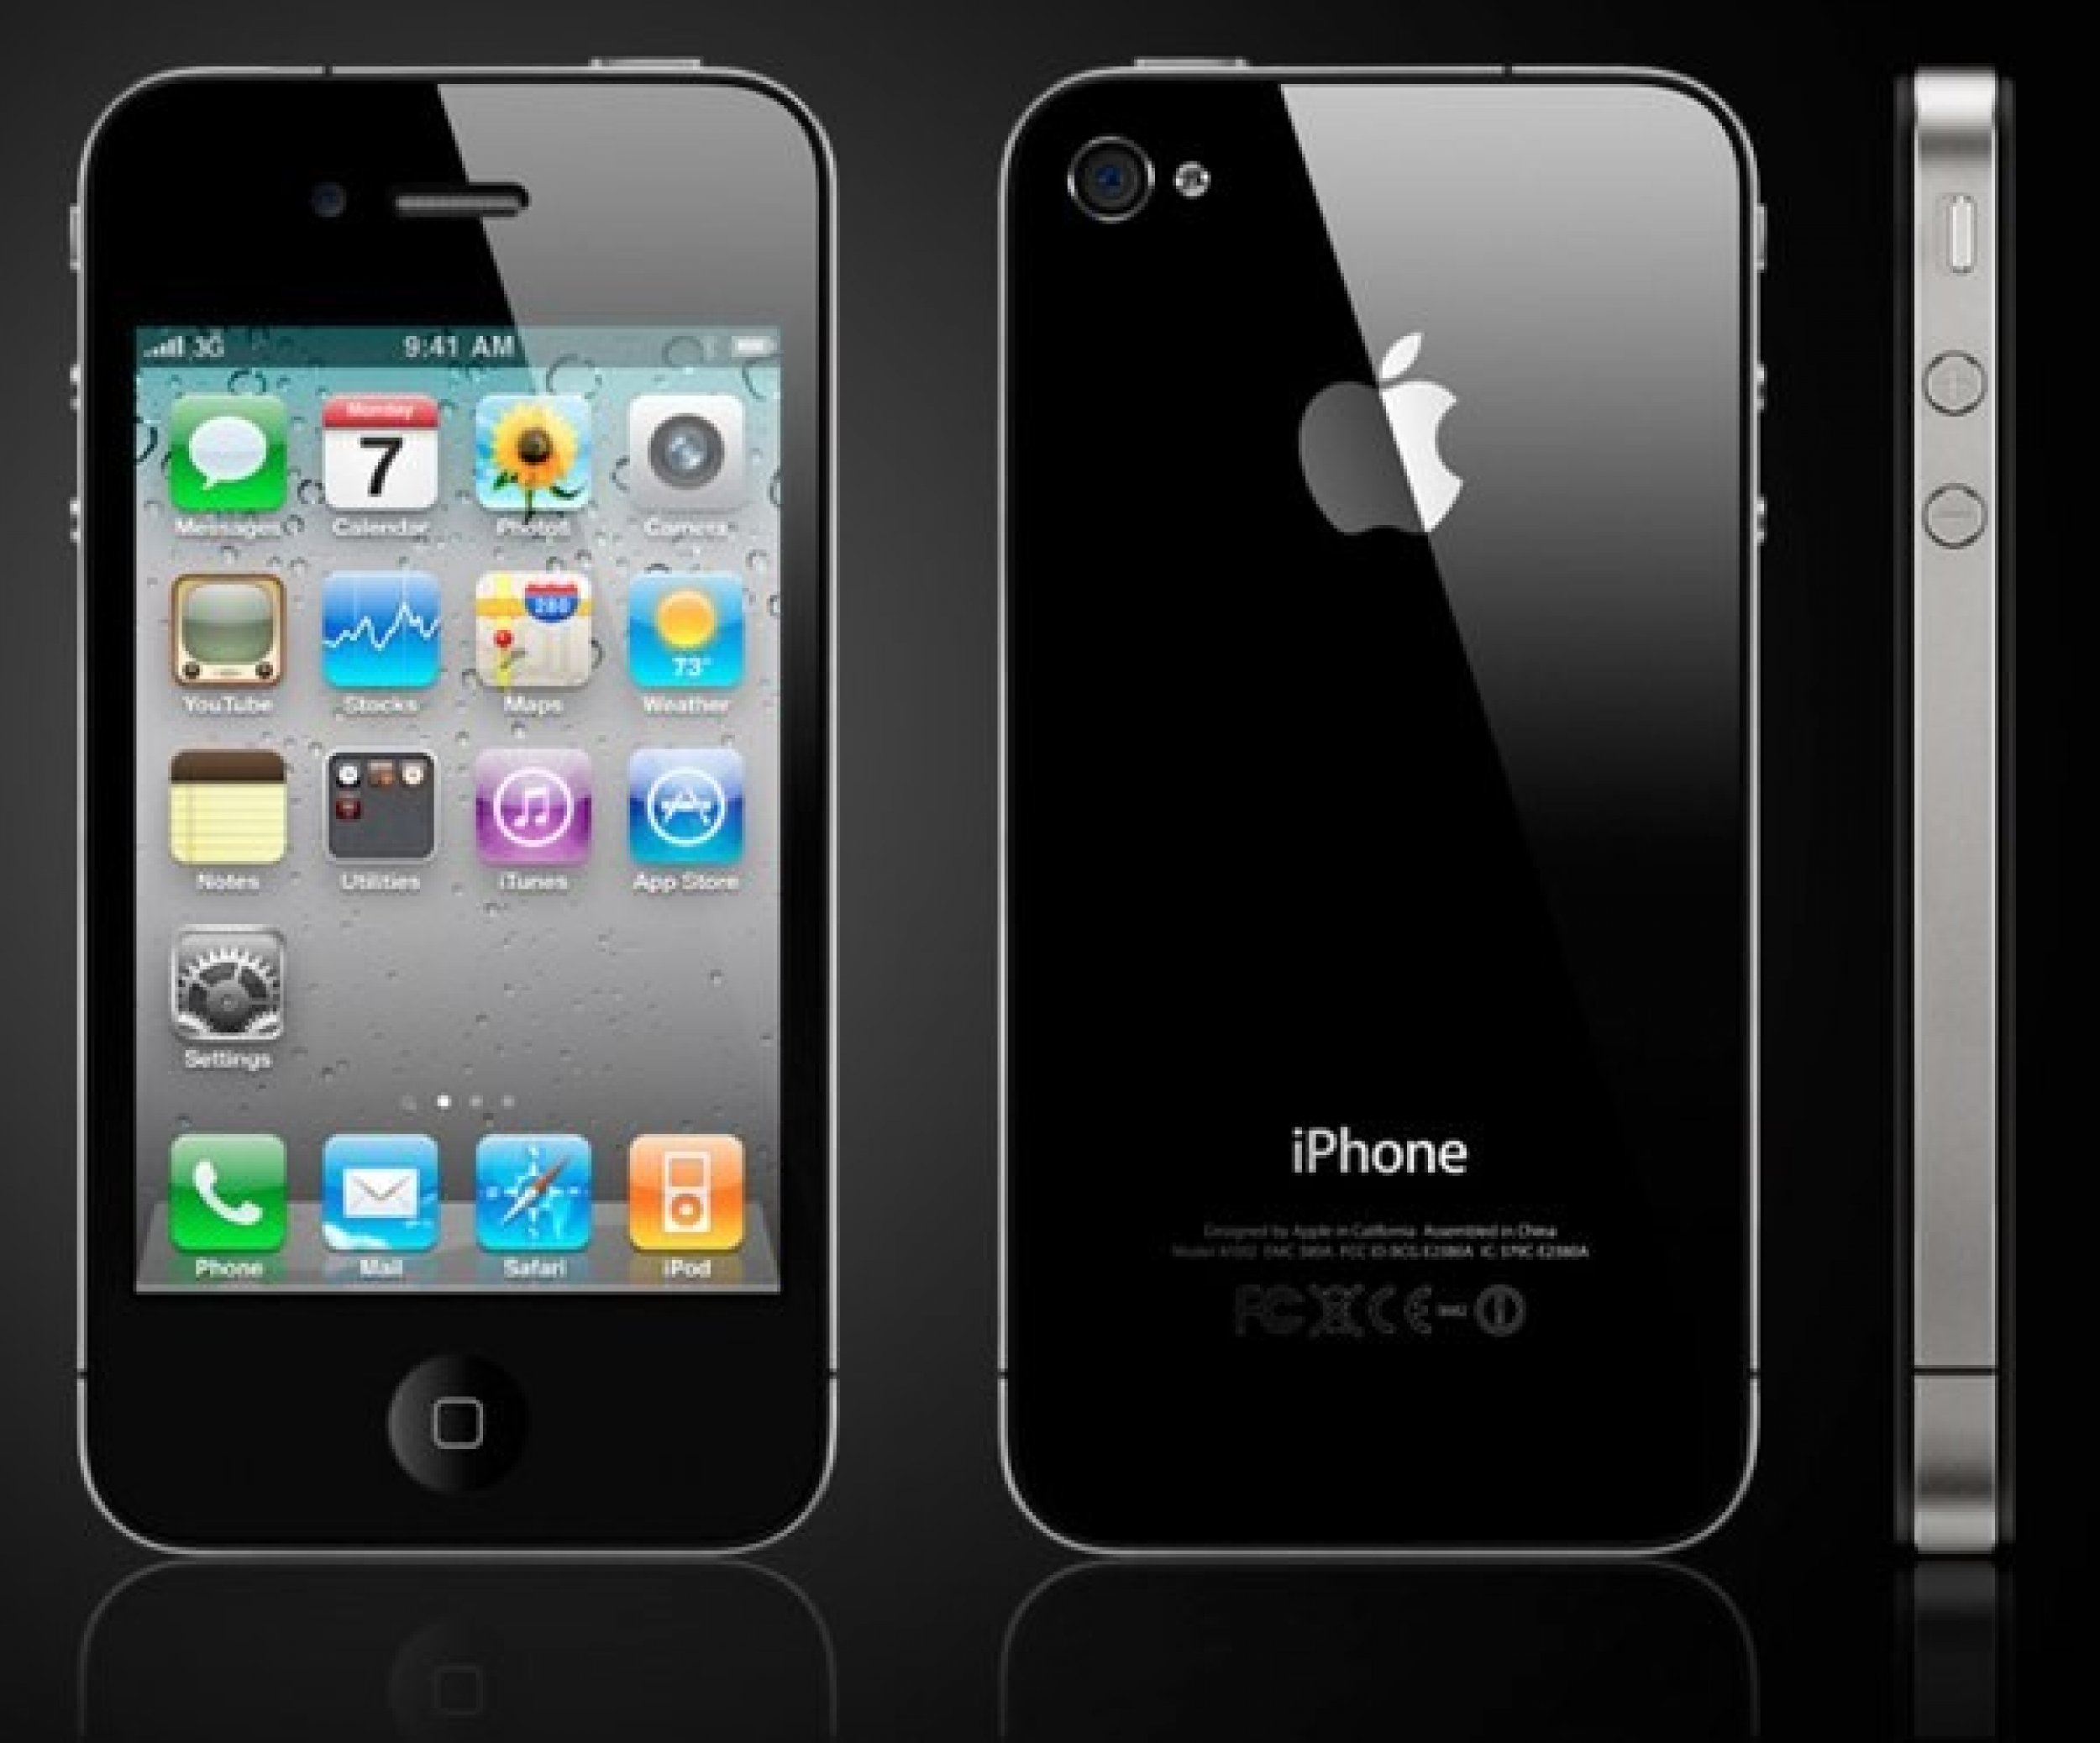 Apple iPhone 5 to Have Voice Control